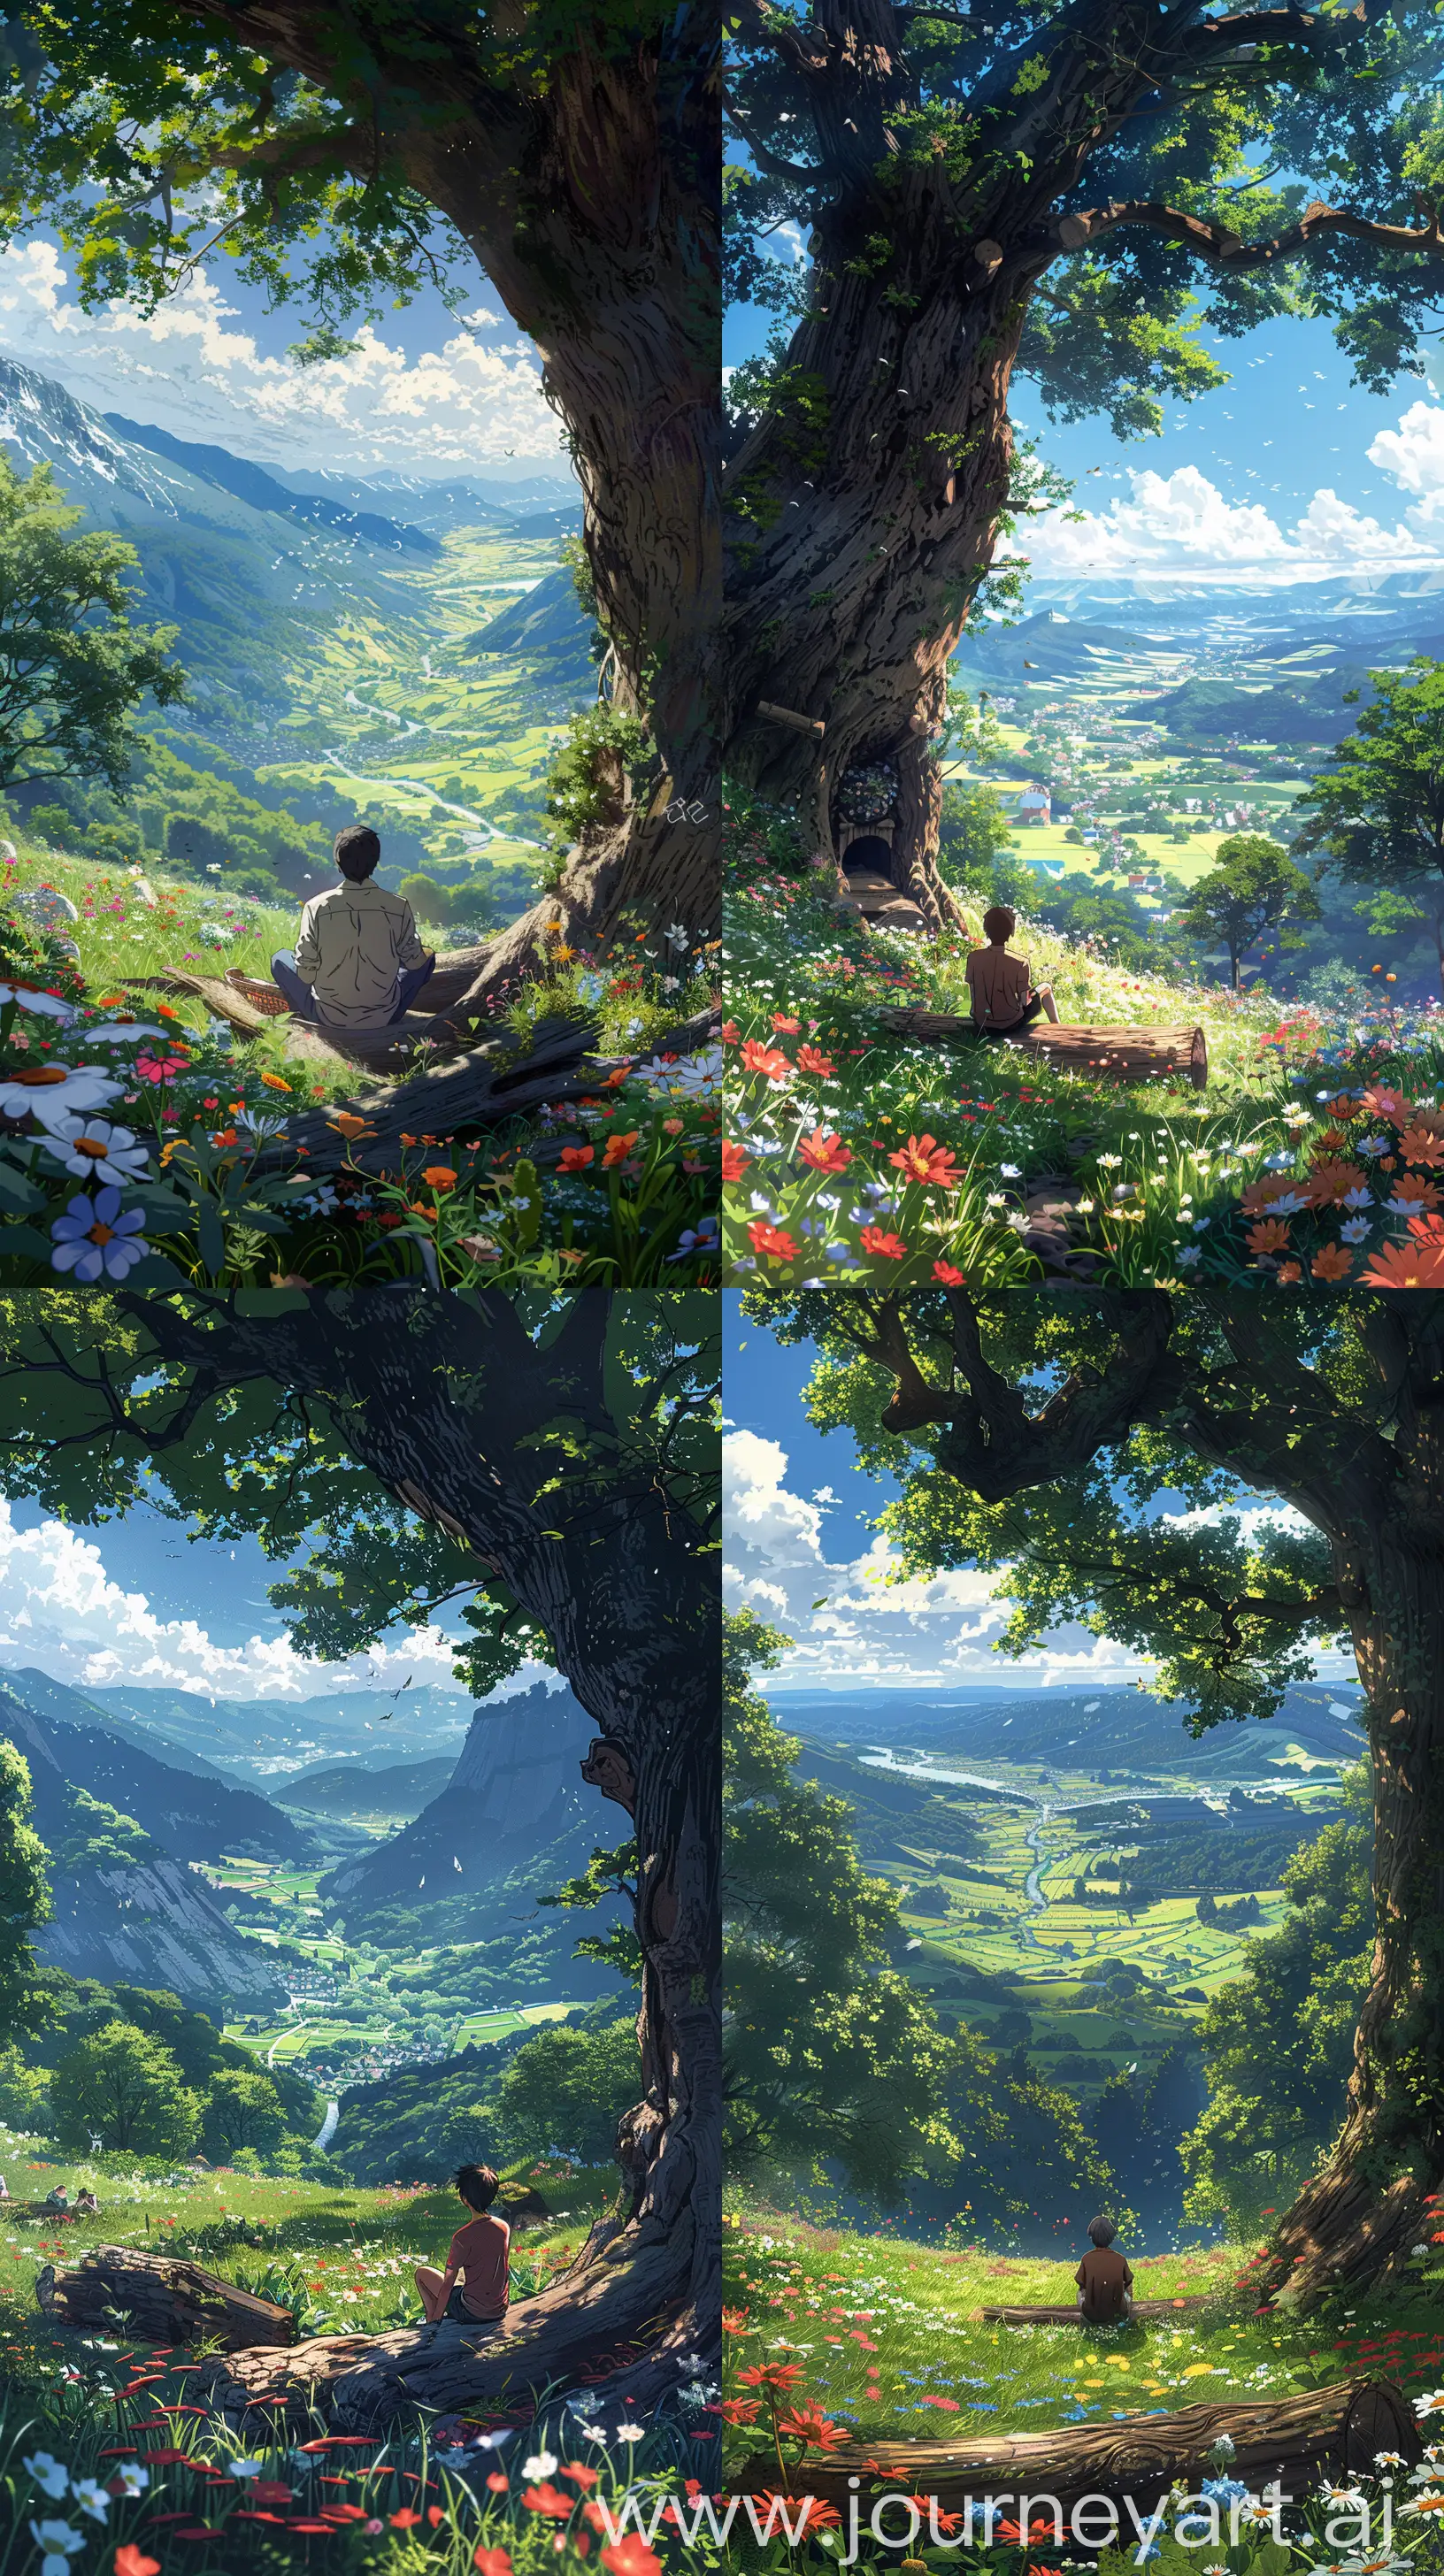 Anime scenary, illustration, mokoto shinkai and Ghibli style mix, direct front facade view of man sit under big tree,summers, looking at valley, wild flowers, breeze, wooden log, cozy, meadows, beautiful view, summer day, vibrant look, ultra HD, high quality, sharp details, anime scenary ,no hyperrealistic --ar 9:16 --s 400